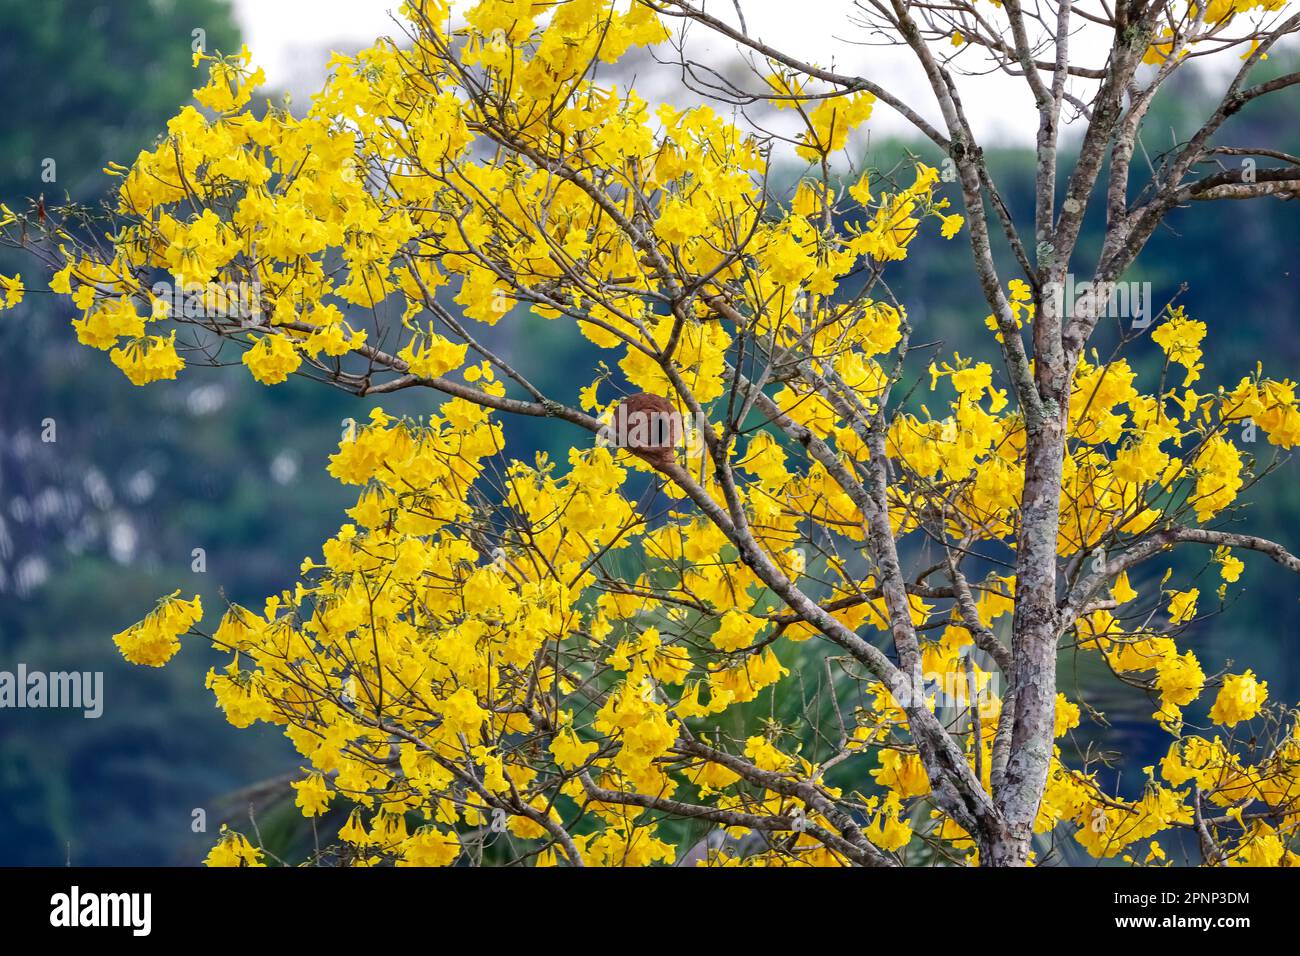 Yellow blooming ipé tree against a dark natural background, Chapada dos Guimarães, Mato Grosso, Brazil, South America Stock Photo